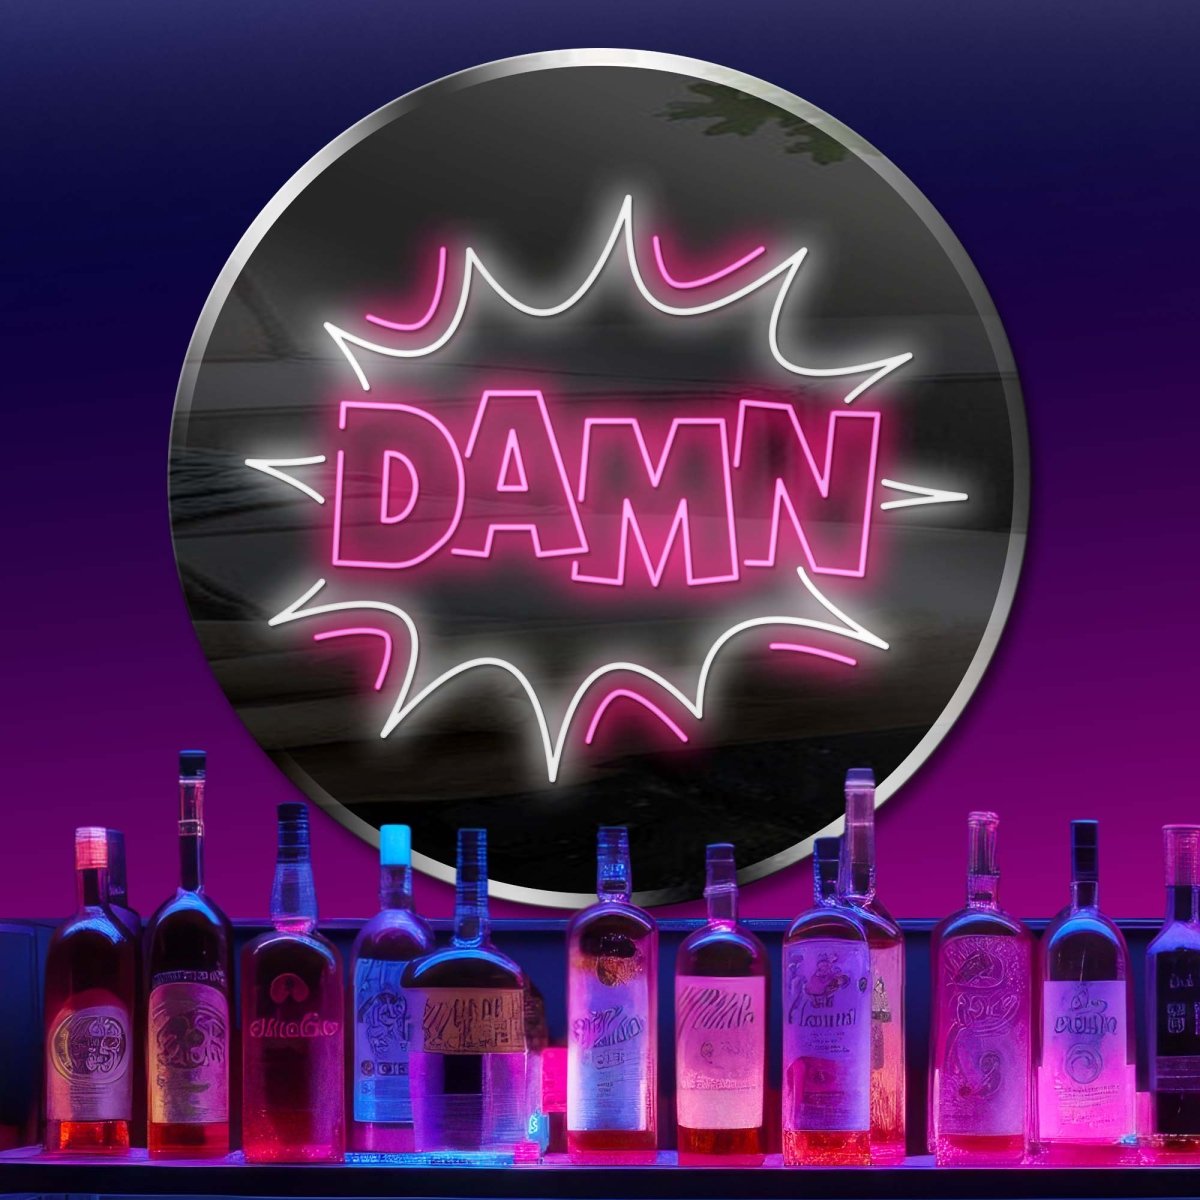 Personalized Neon Sign Damn - madaboutneon